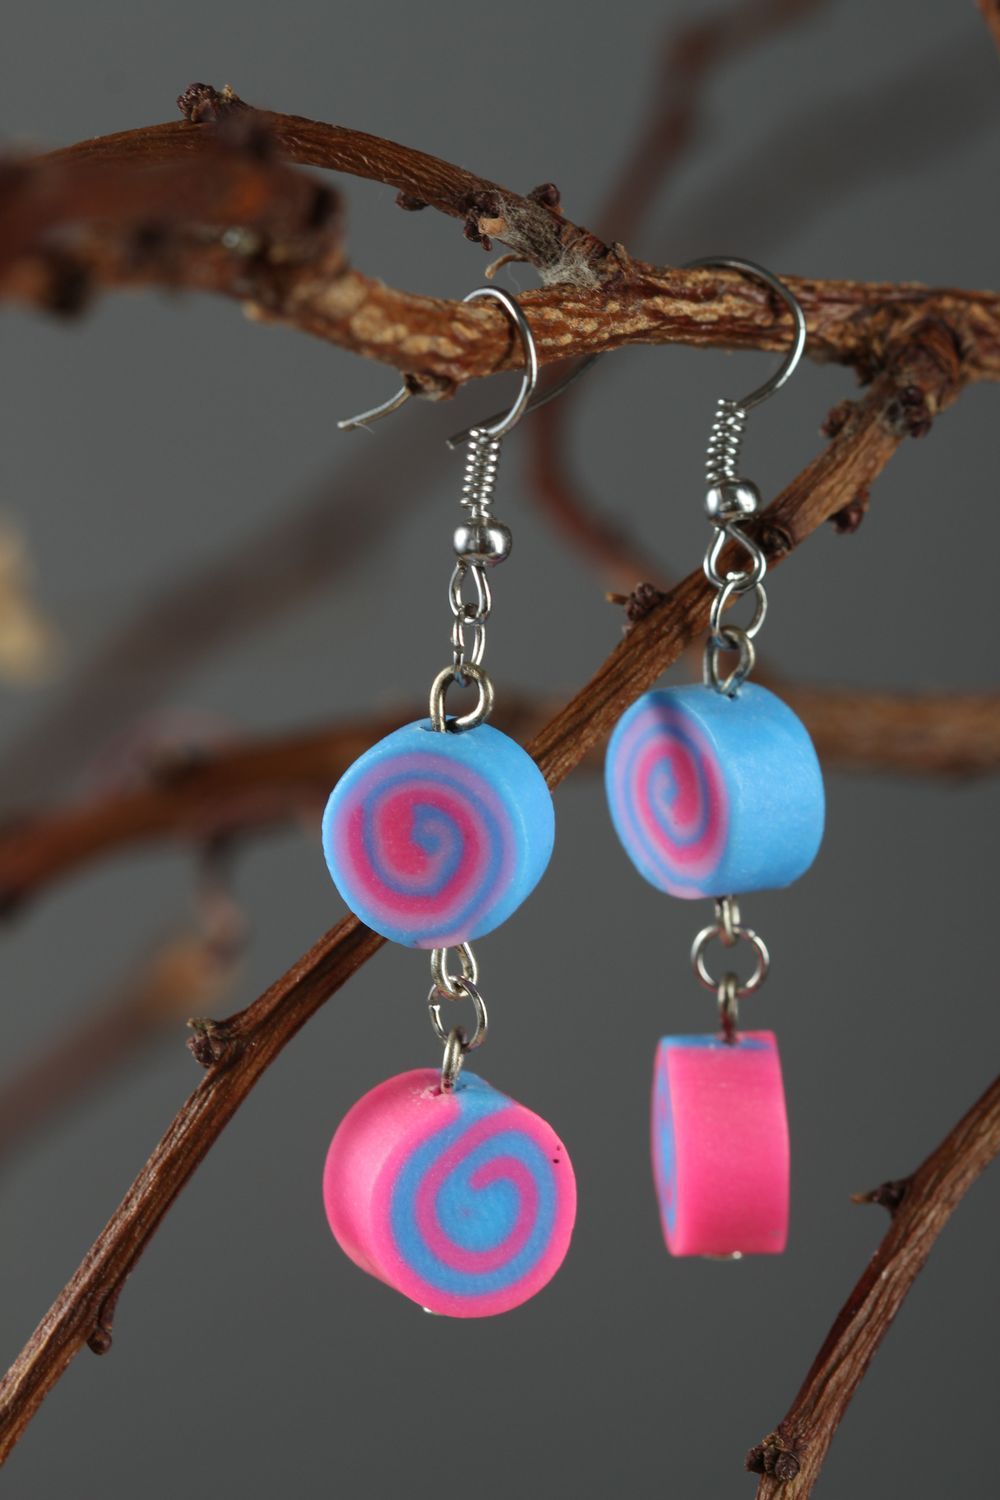 Handmade bright cute earrings designer polymer clay jewelry earrings with charms photo 1